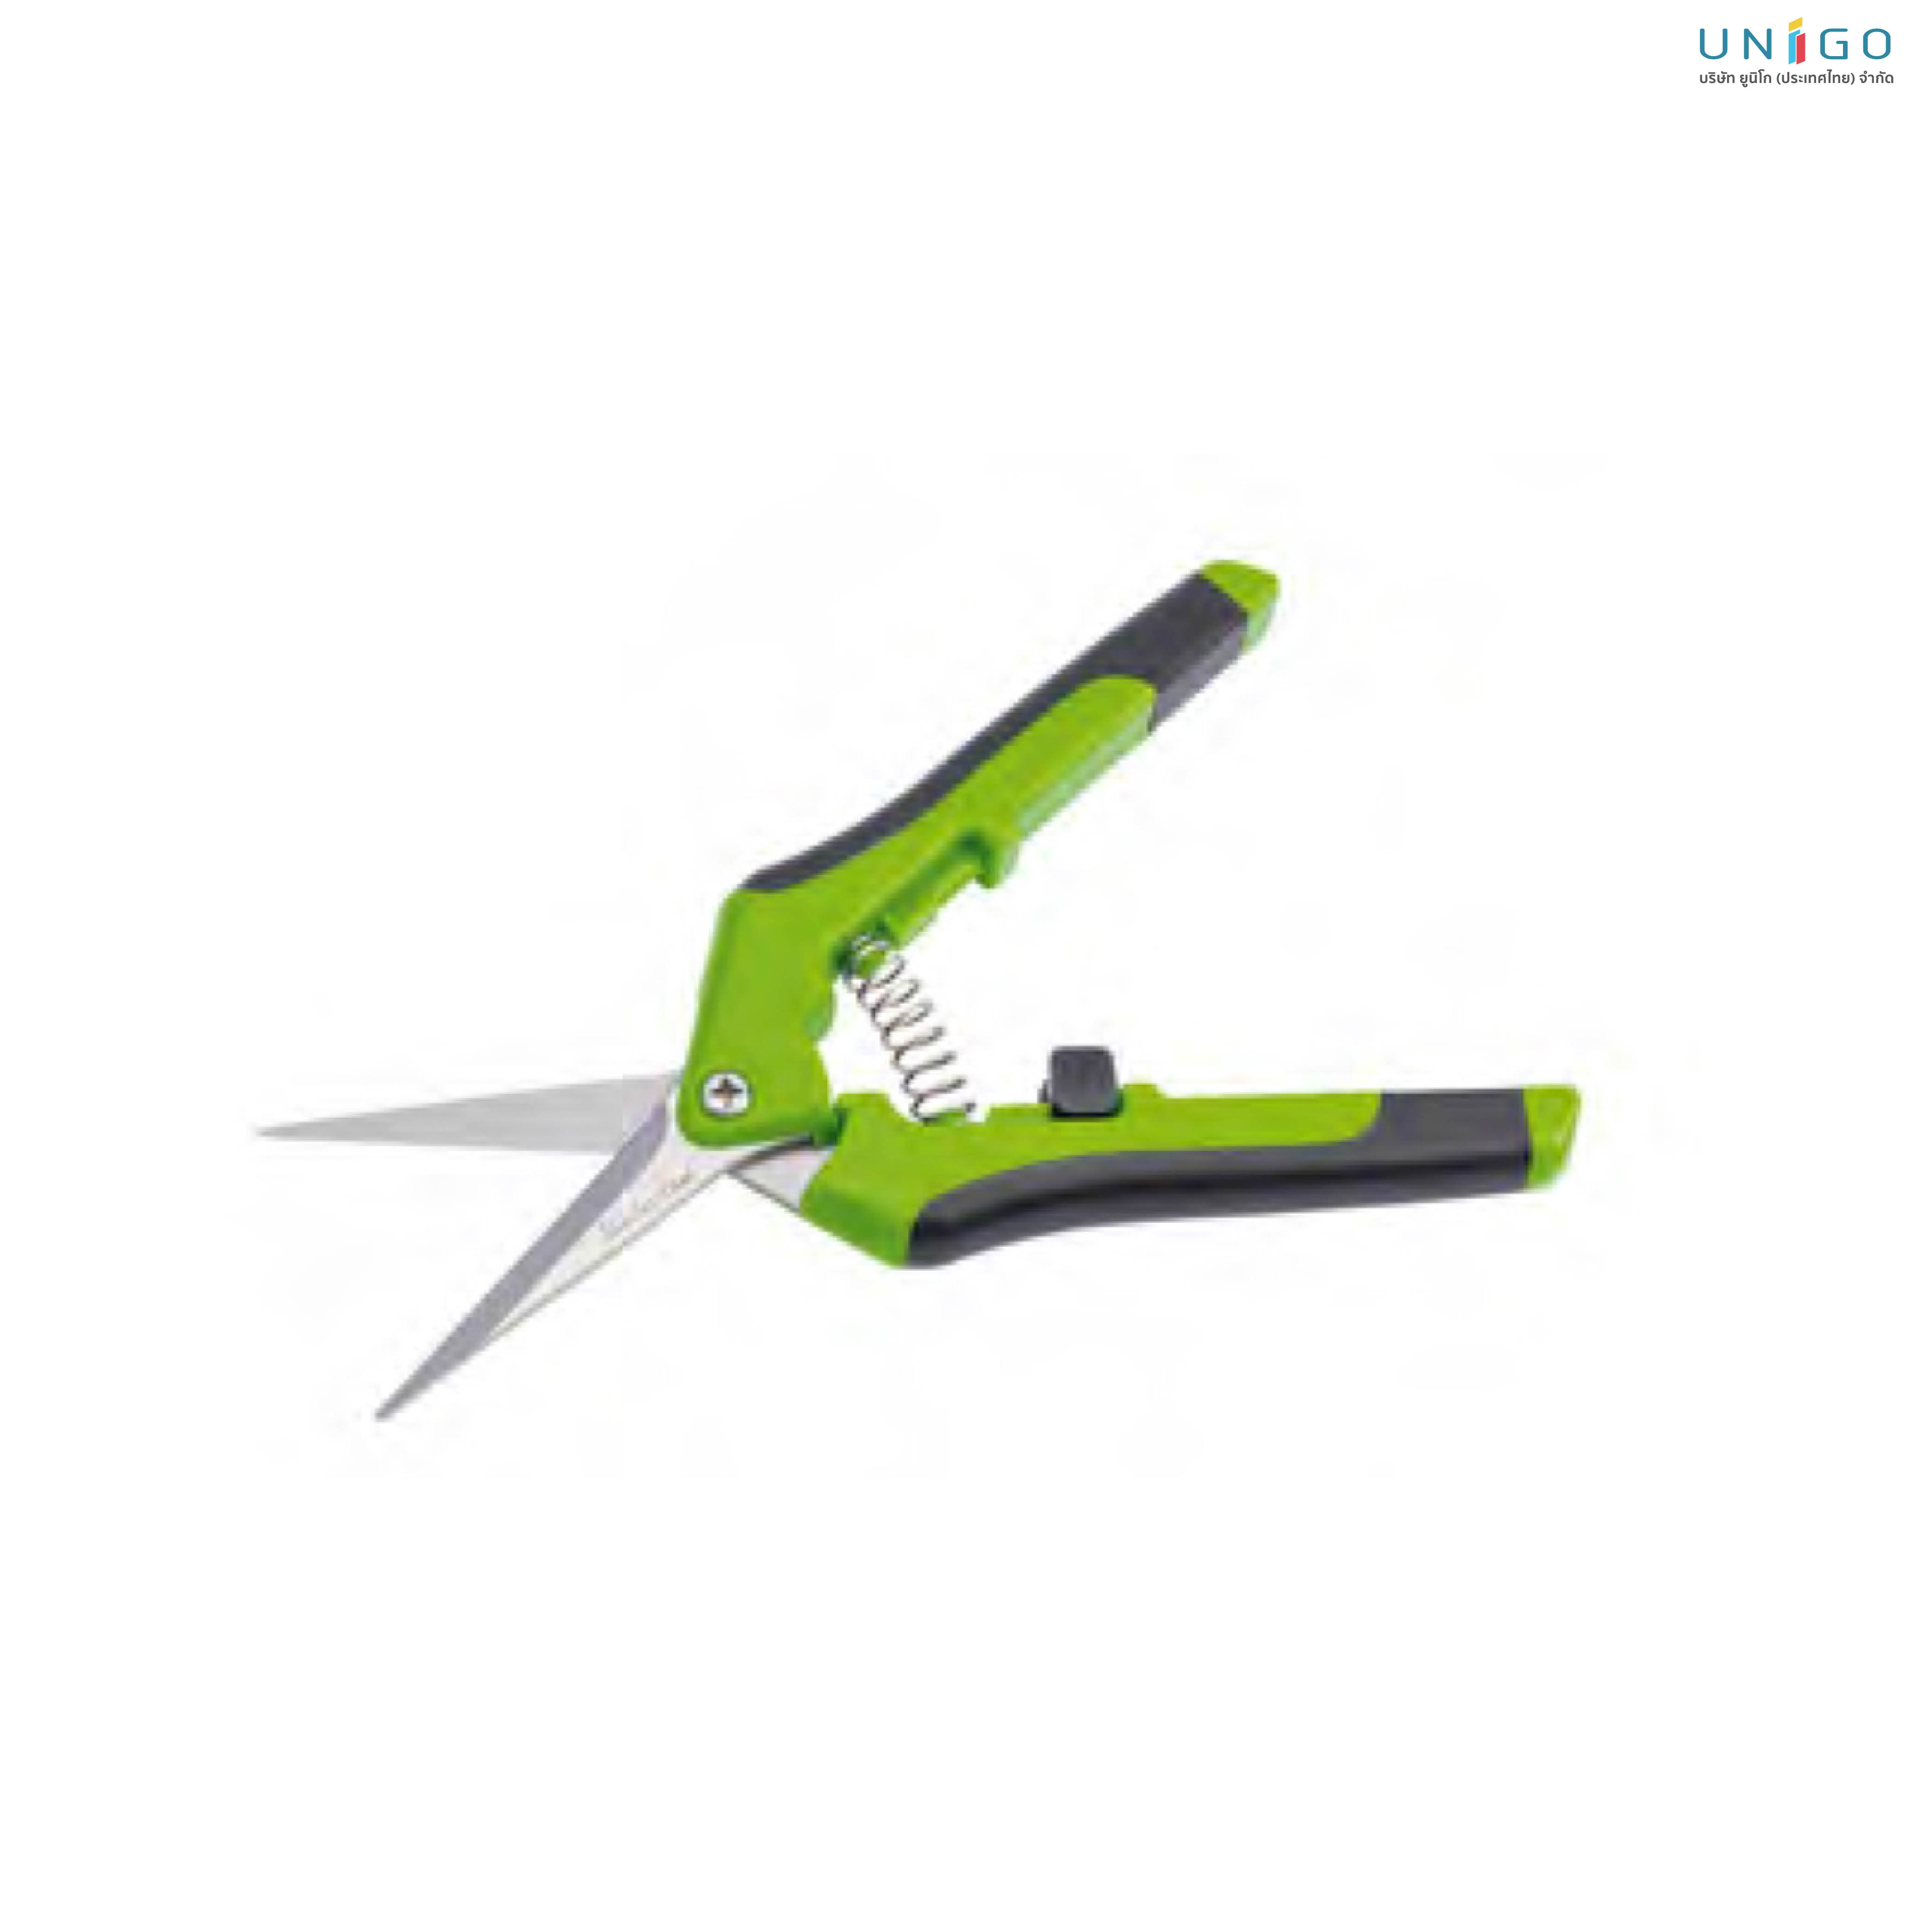 6.5" PRECISION STRAIGHT PRUNING SECATEUR